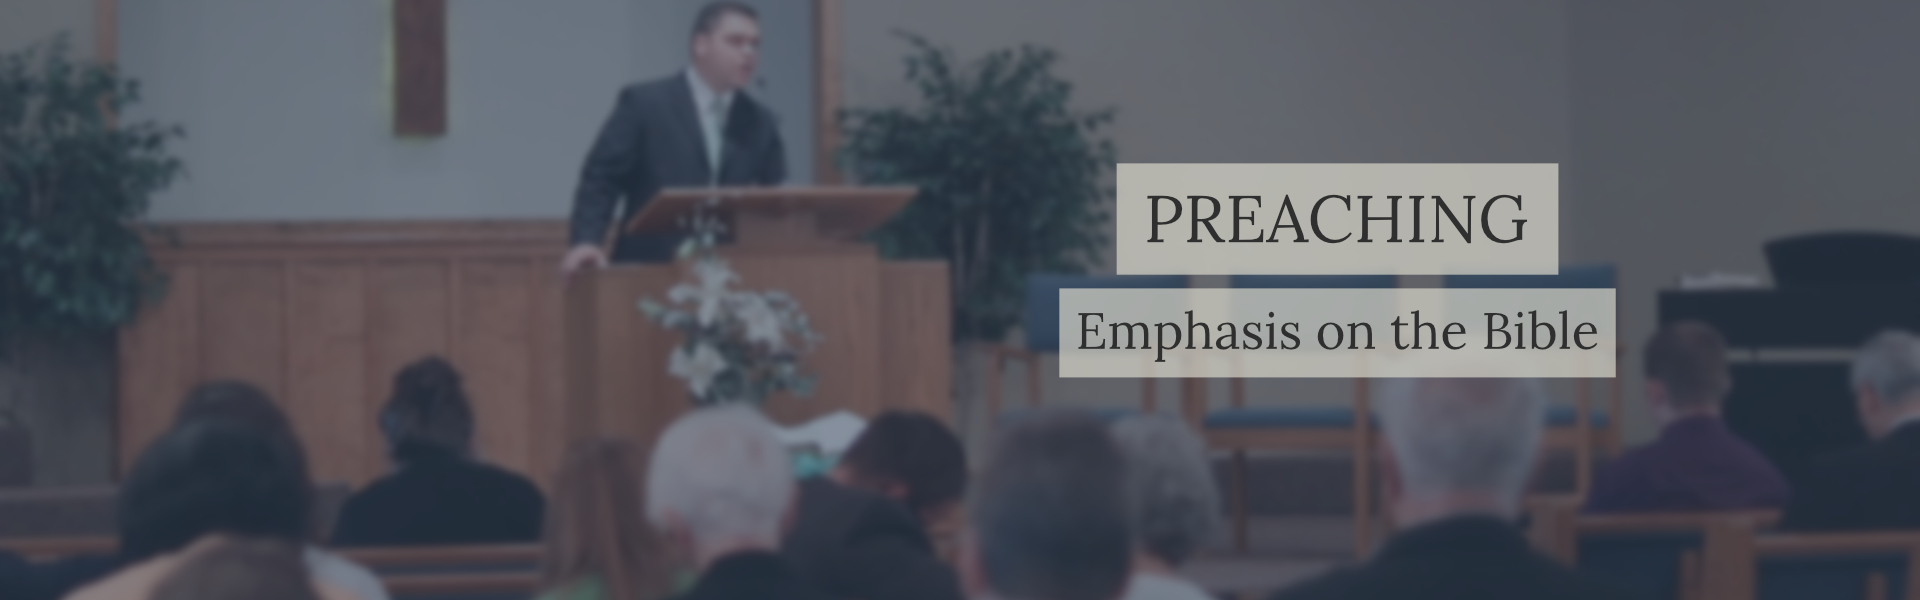 Preaching: Emphasis on the Bible